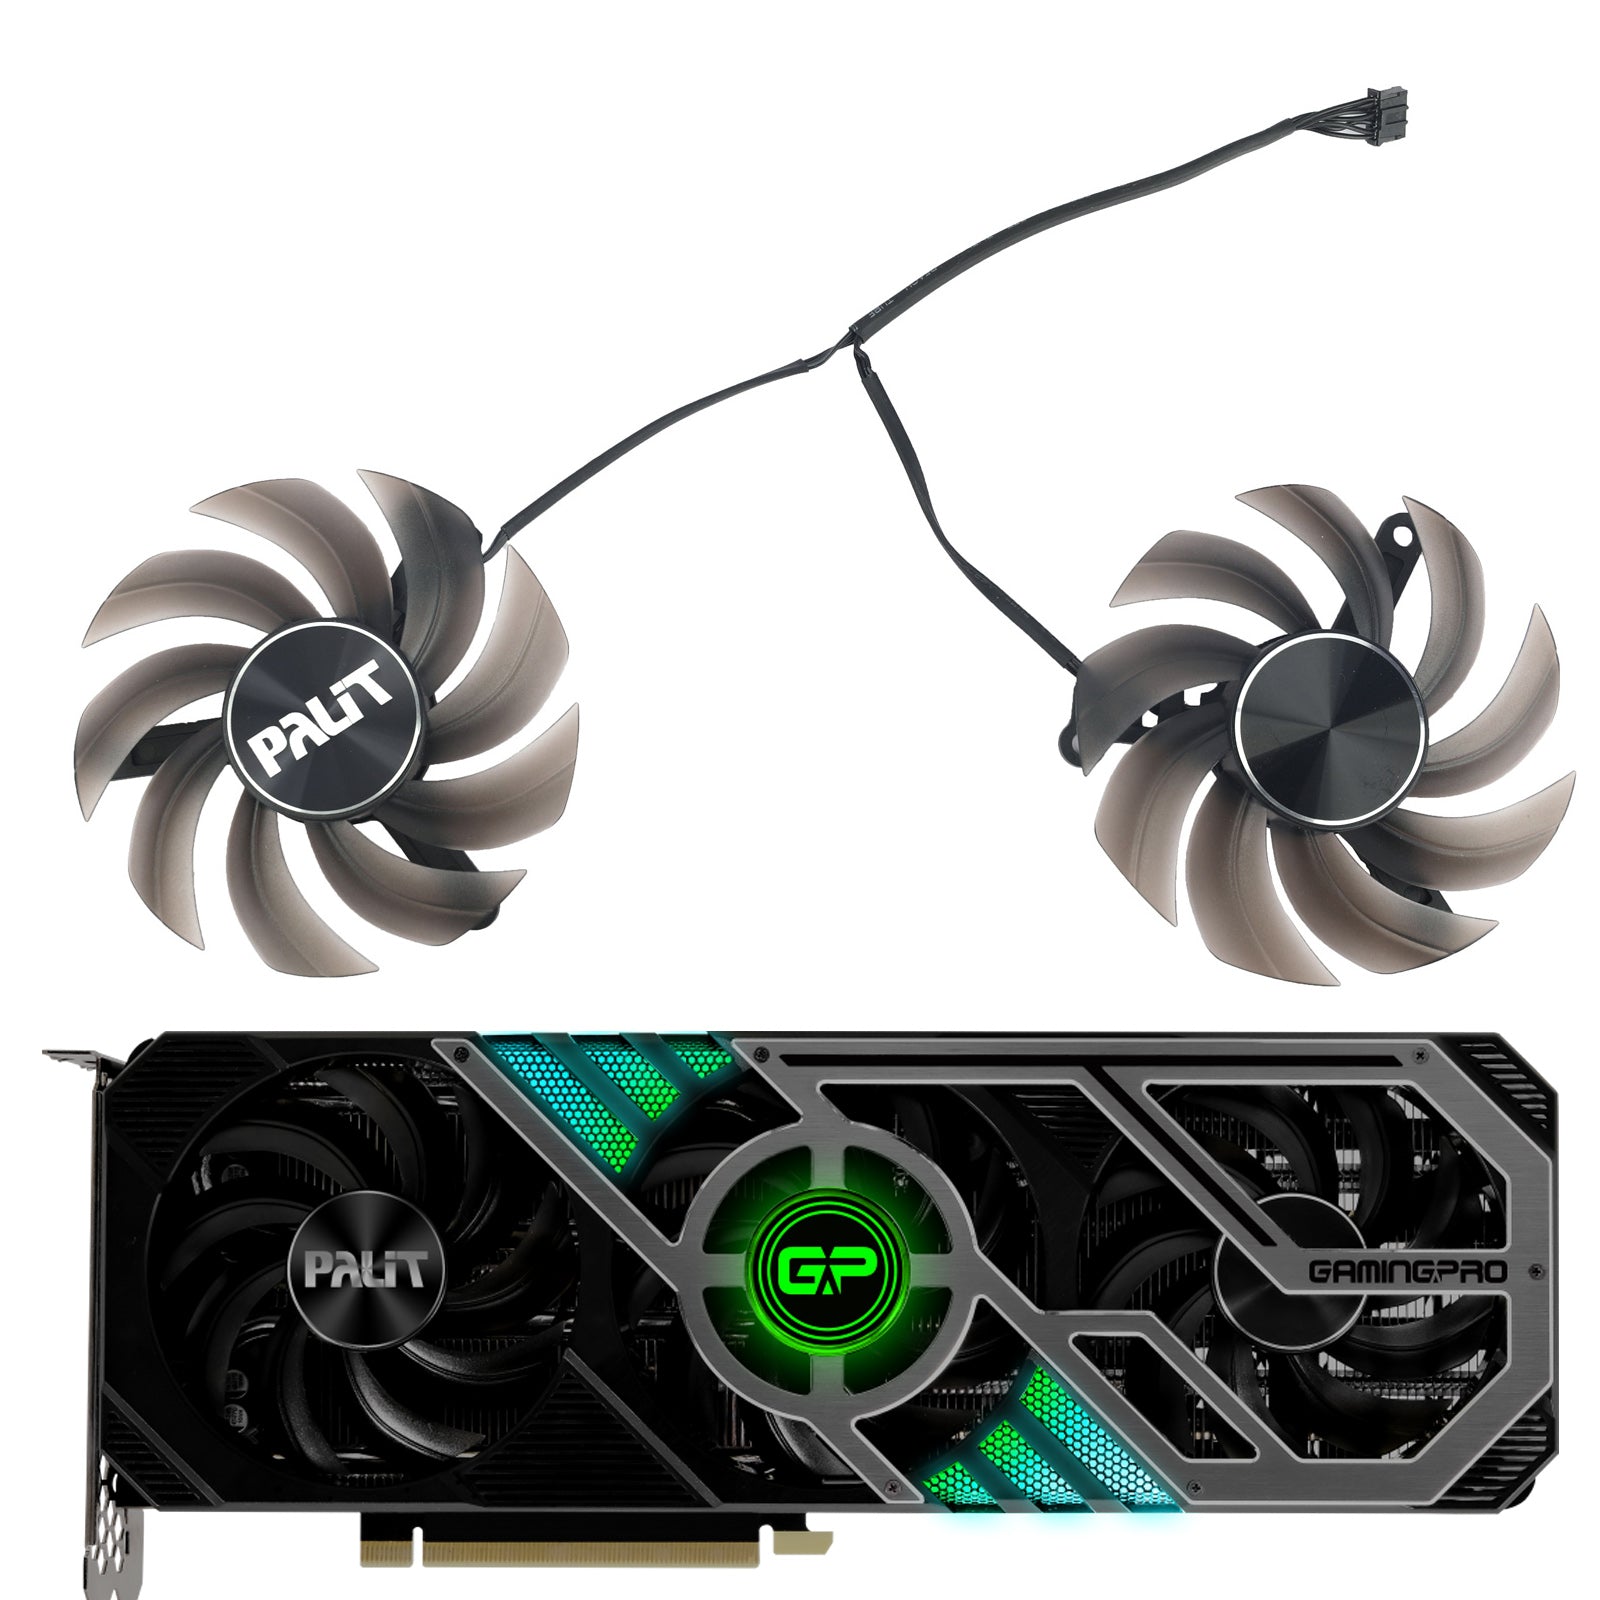 FD8015U12D Video Card Fan Replacement For Palit RTX 3060 Ti 3070